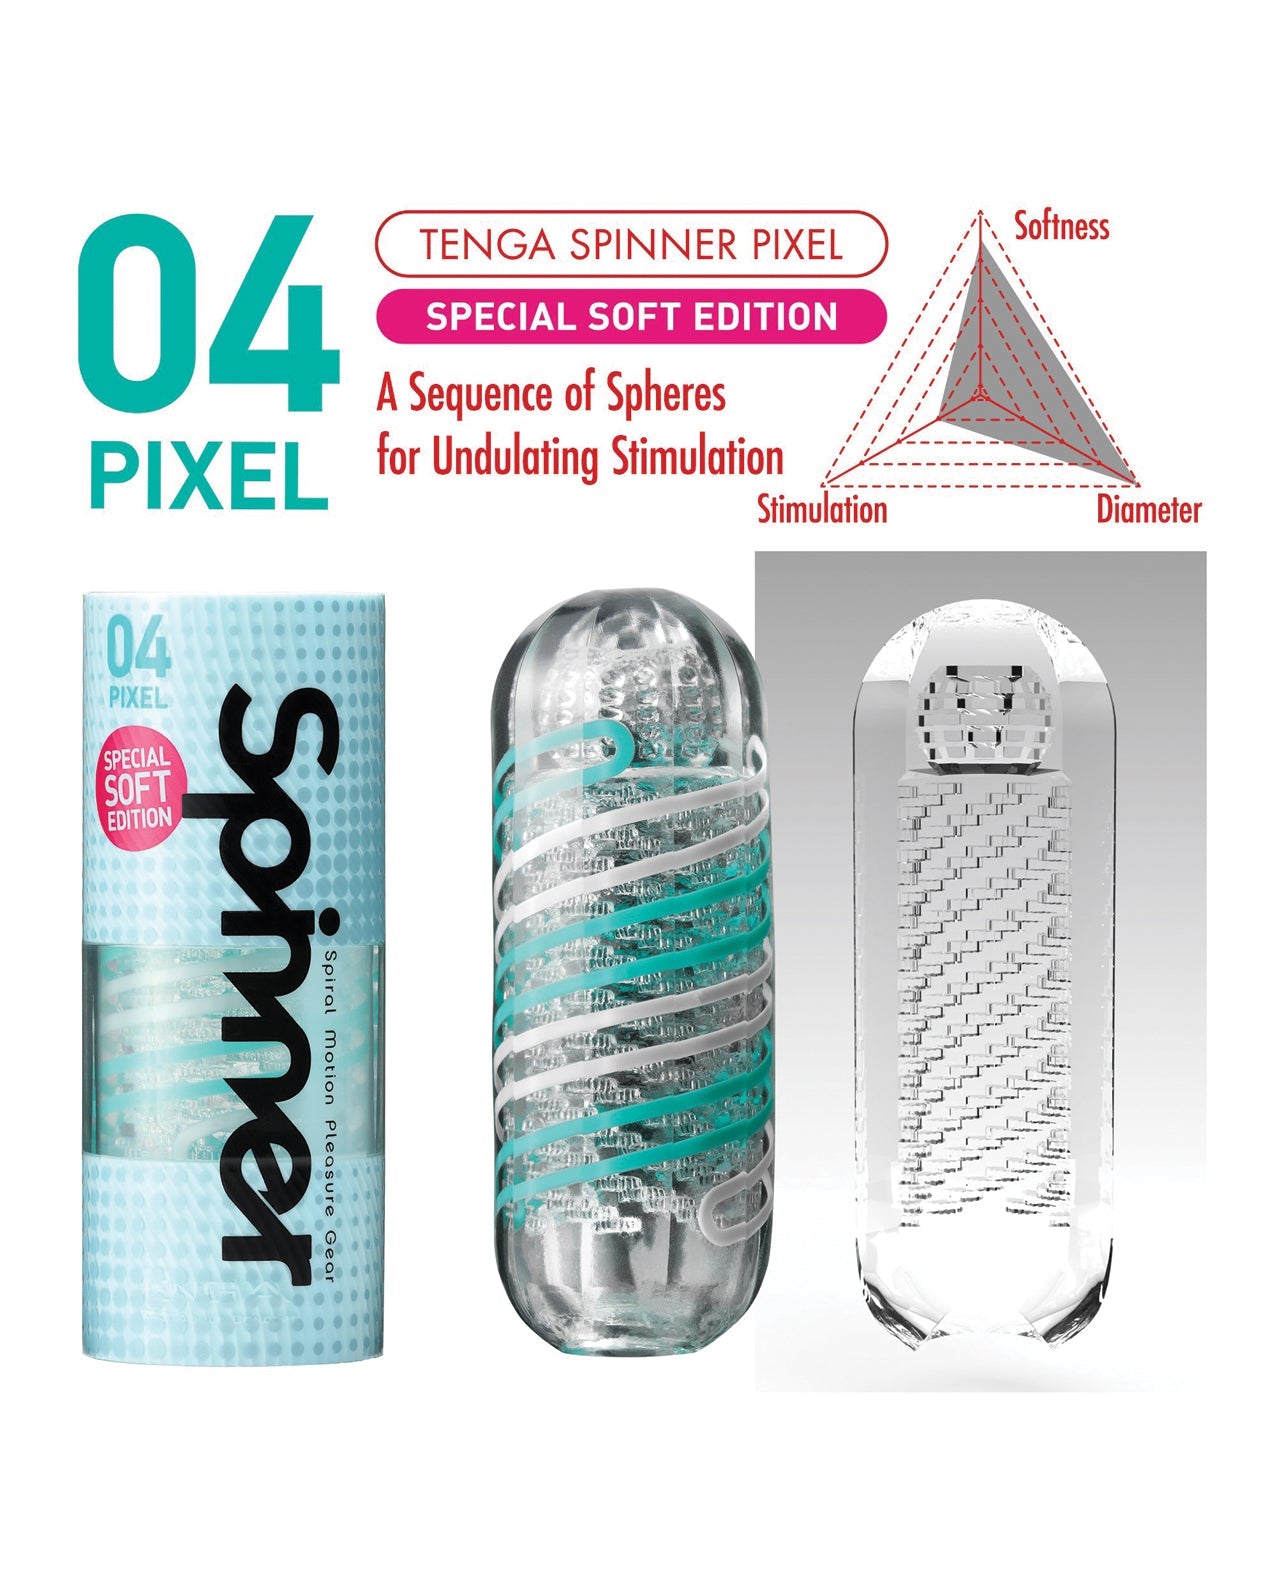 Tenga Spinner Pixel - Special Soft Edition